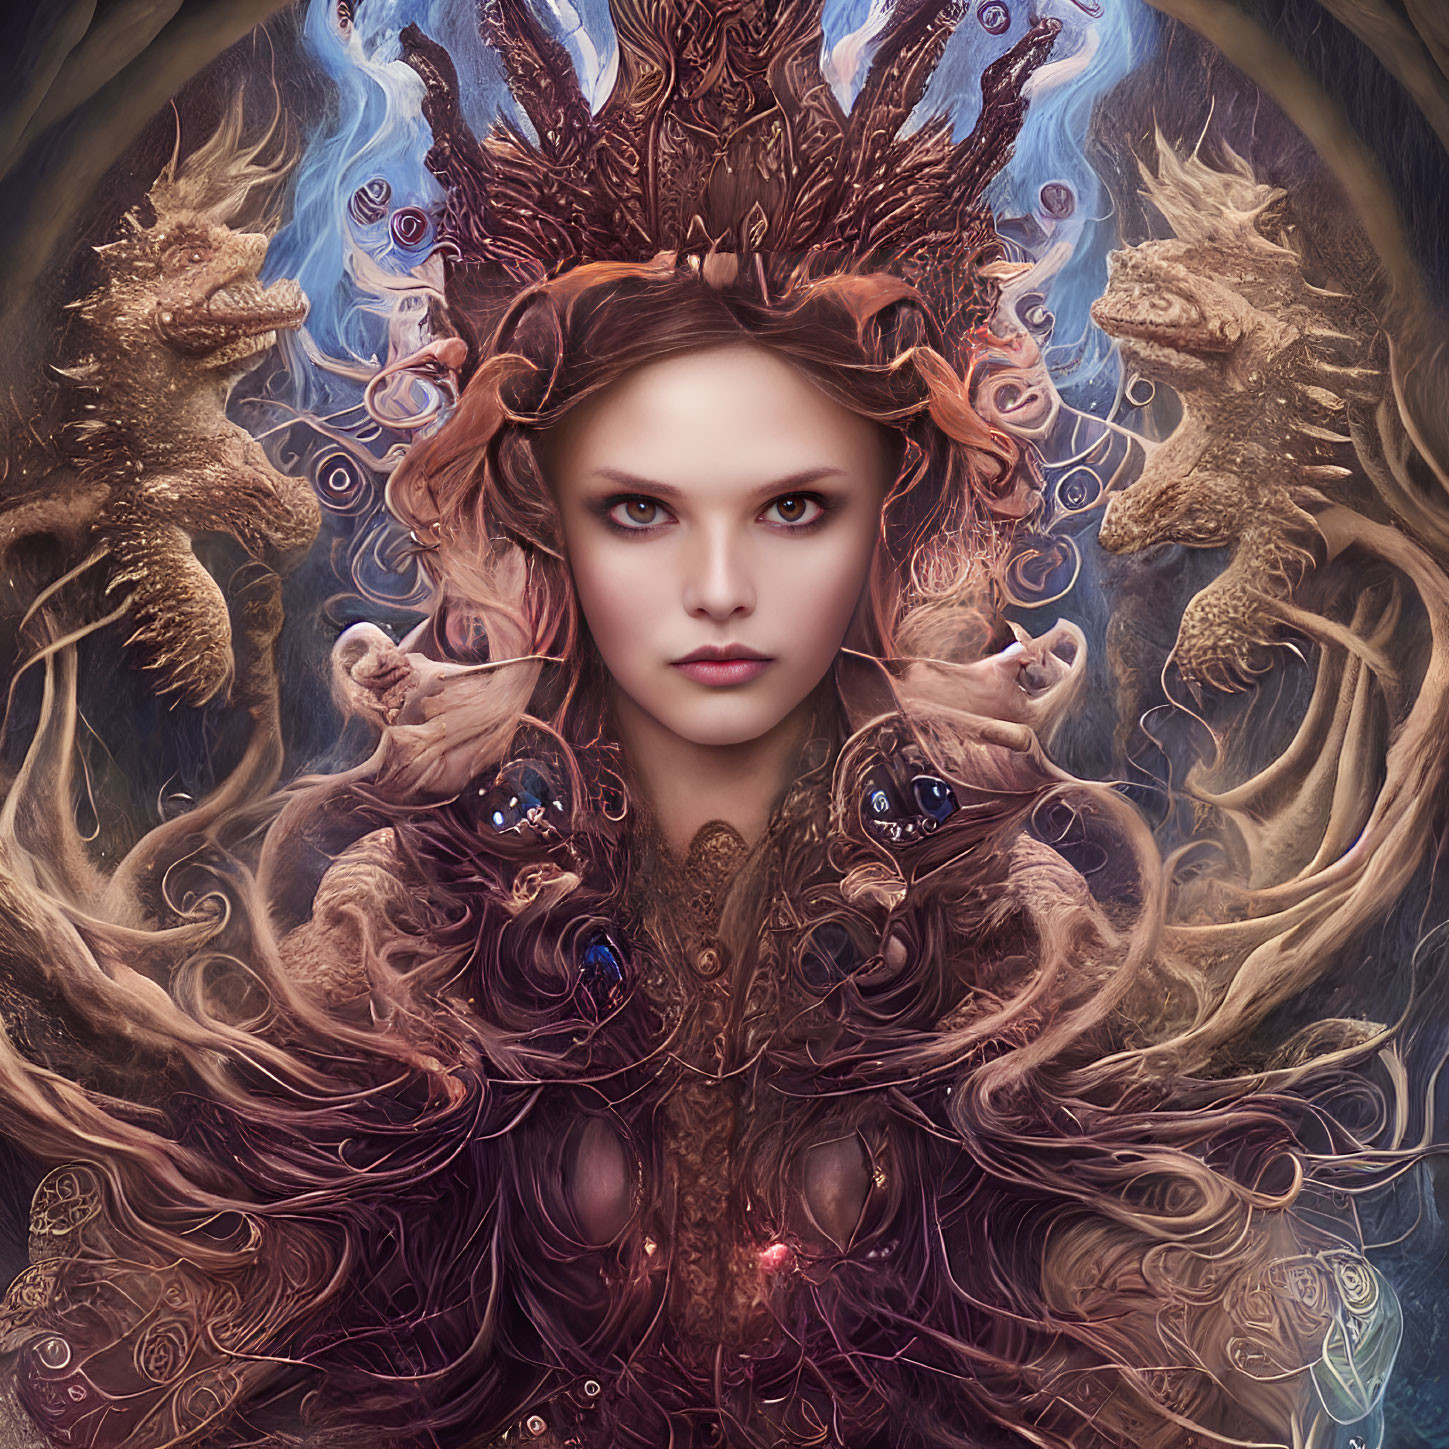 Fantasy portrait featuring woman with ornate crown and mythical creatures